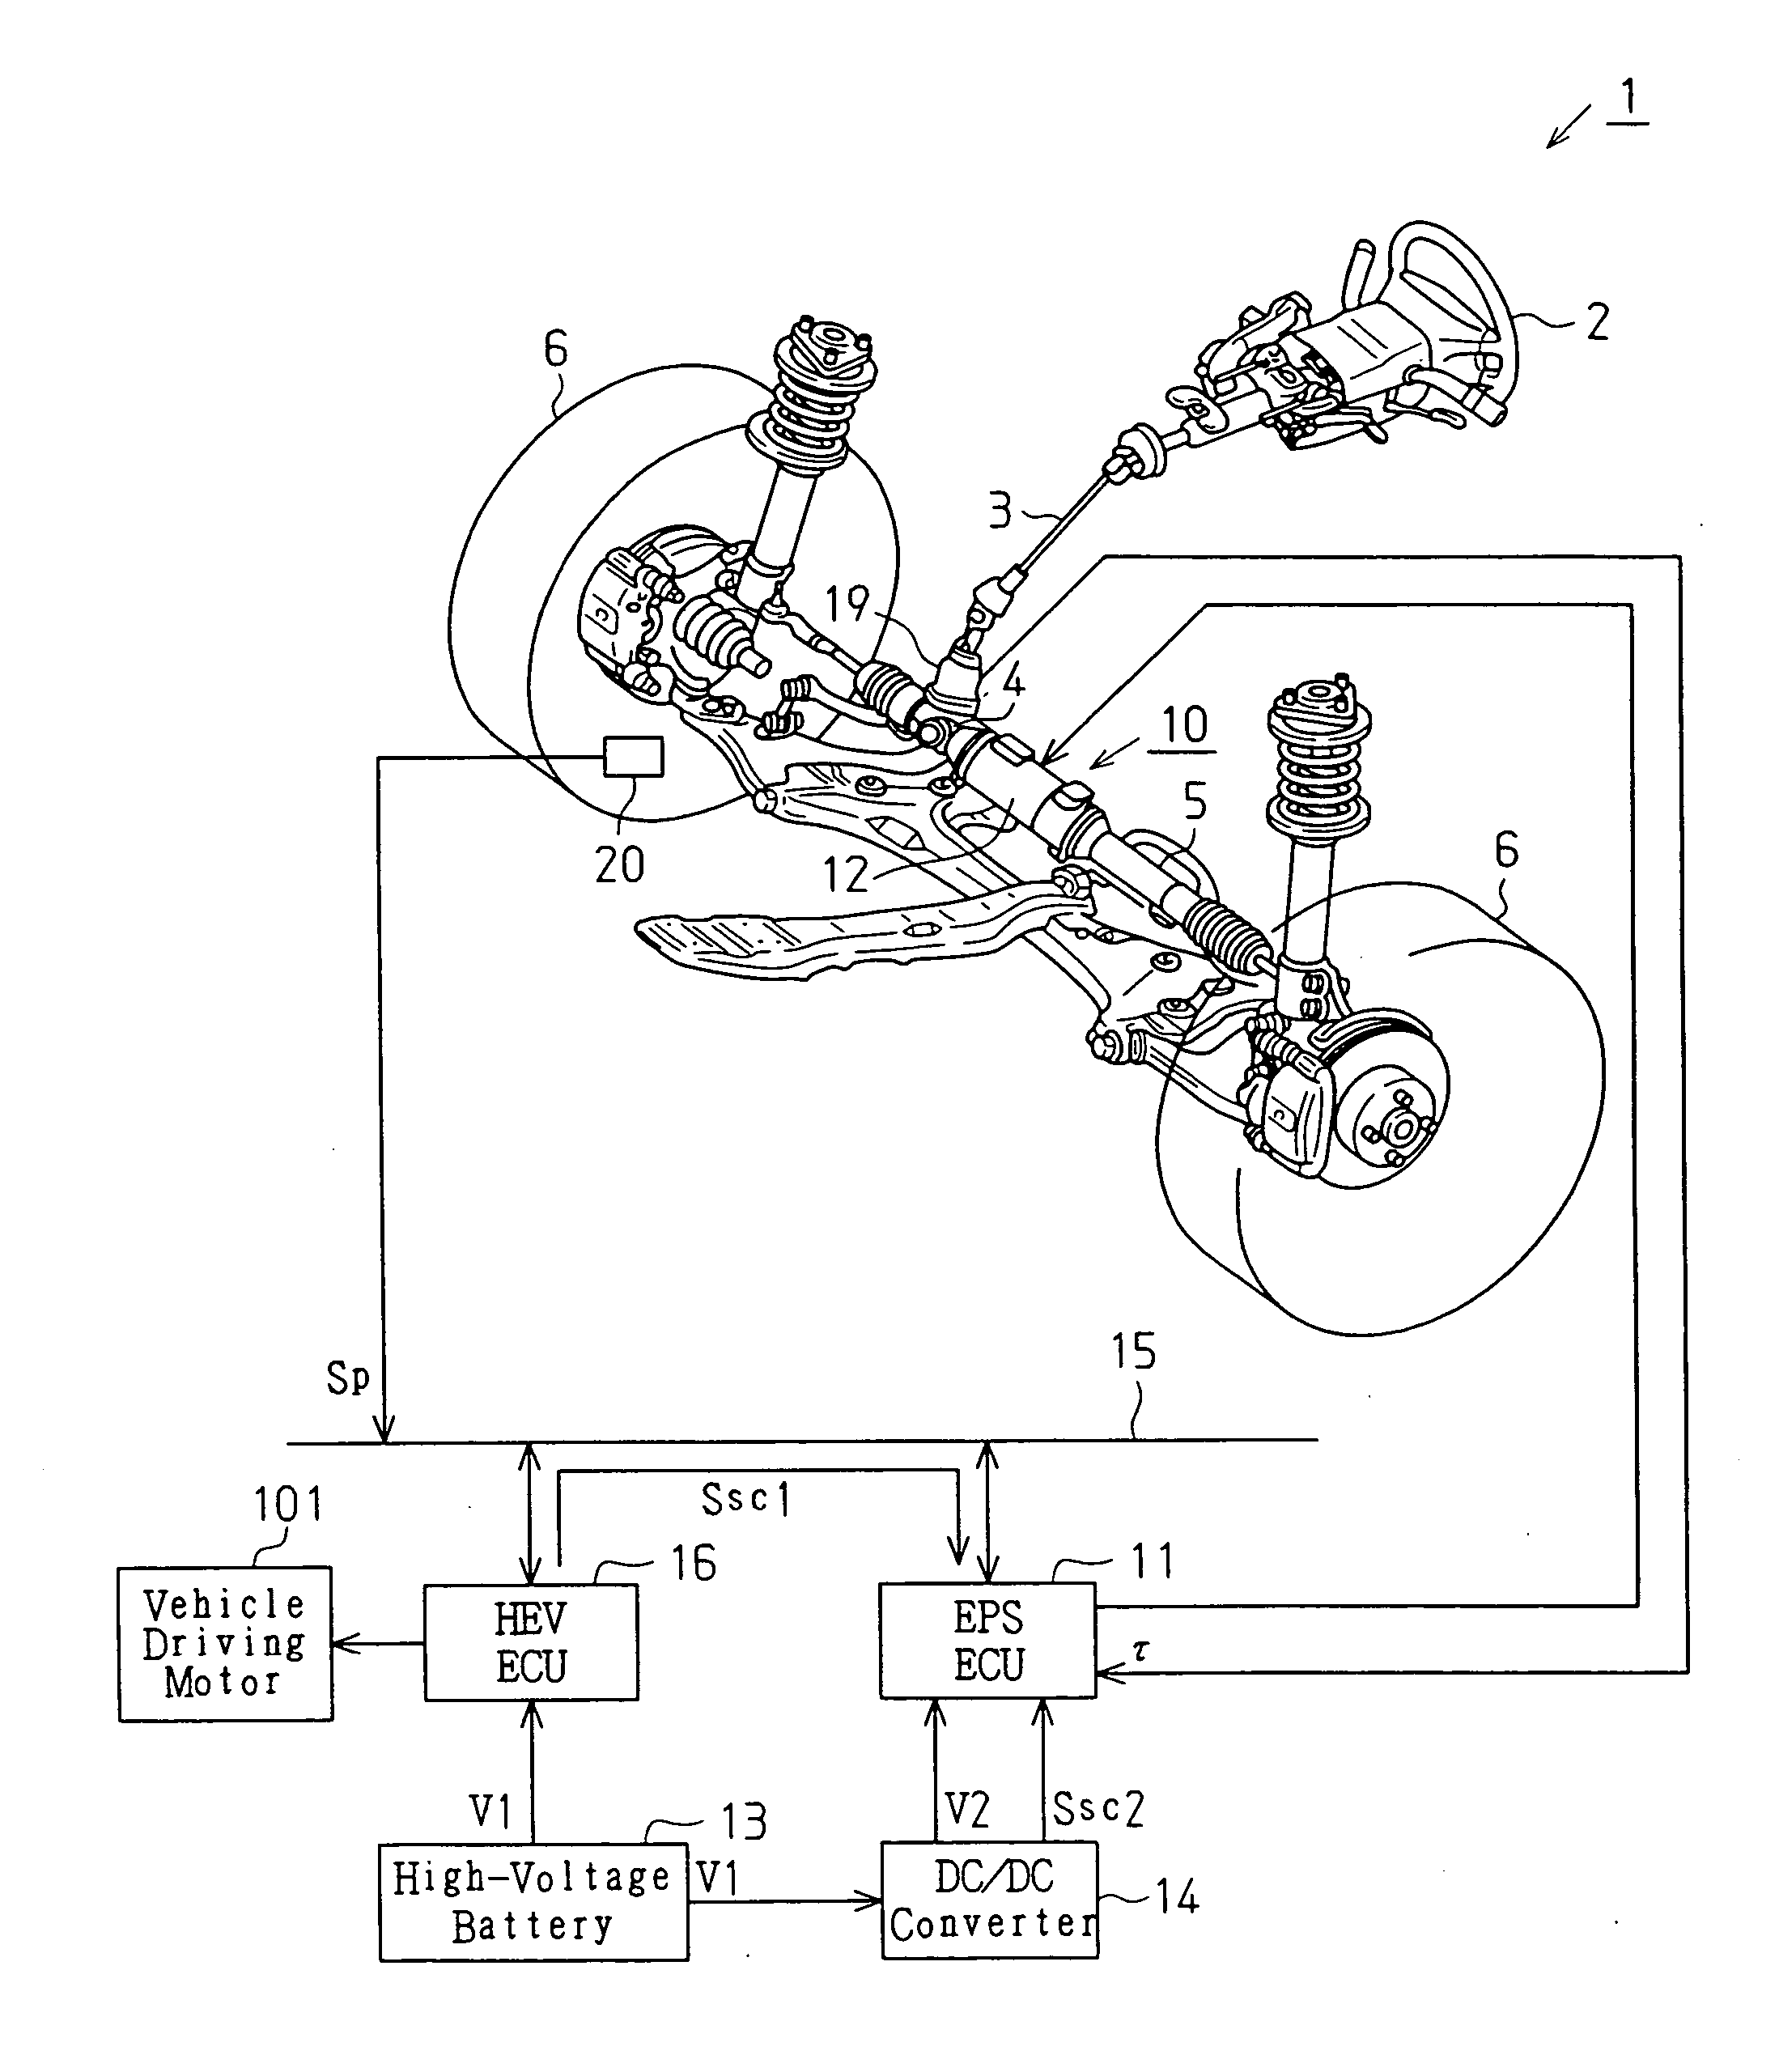 Electric power steering apparatus and electricity supply system